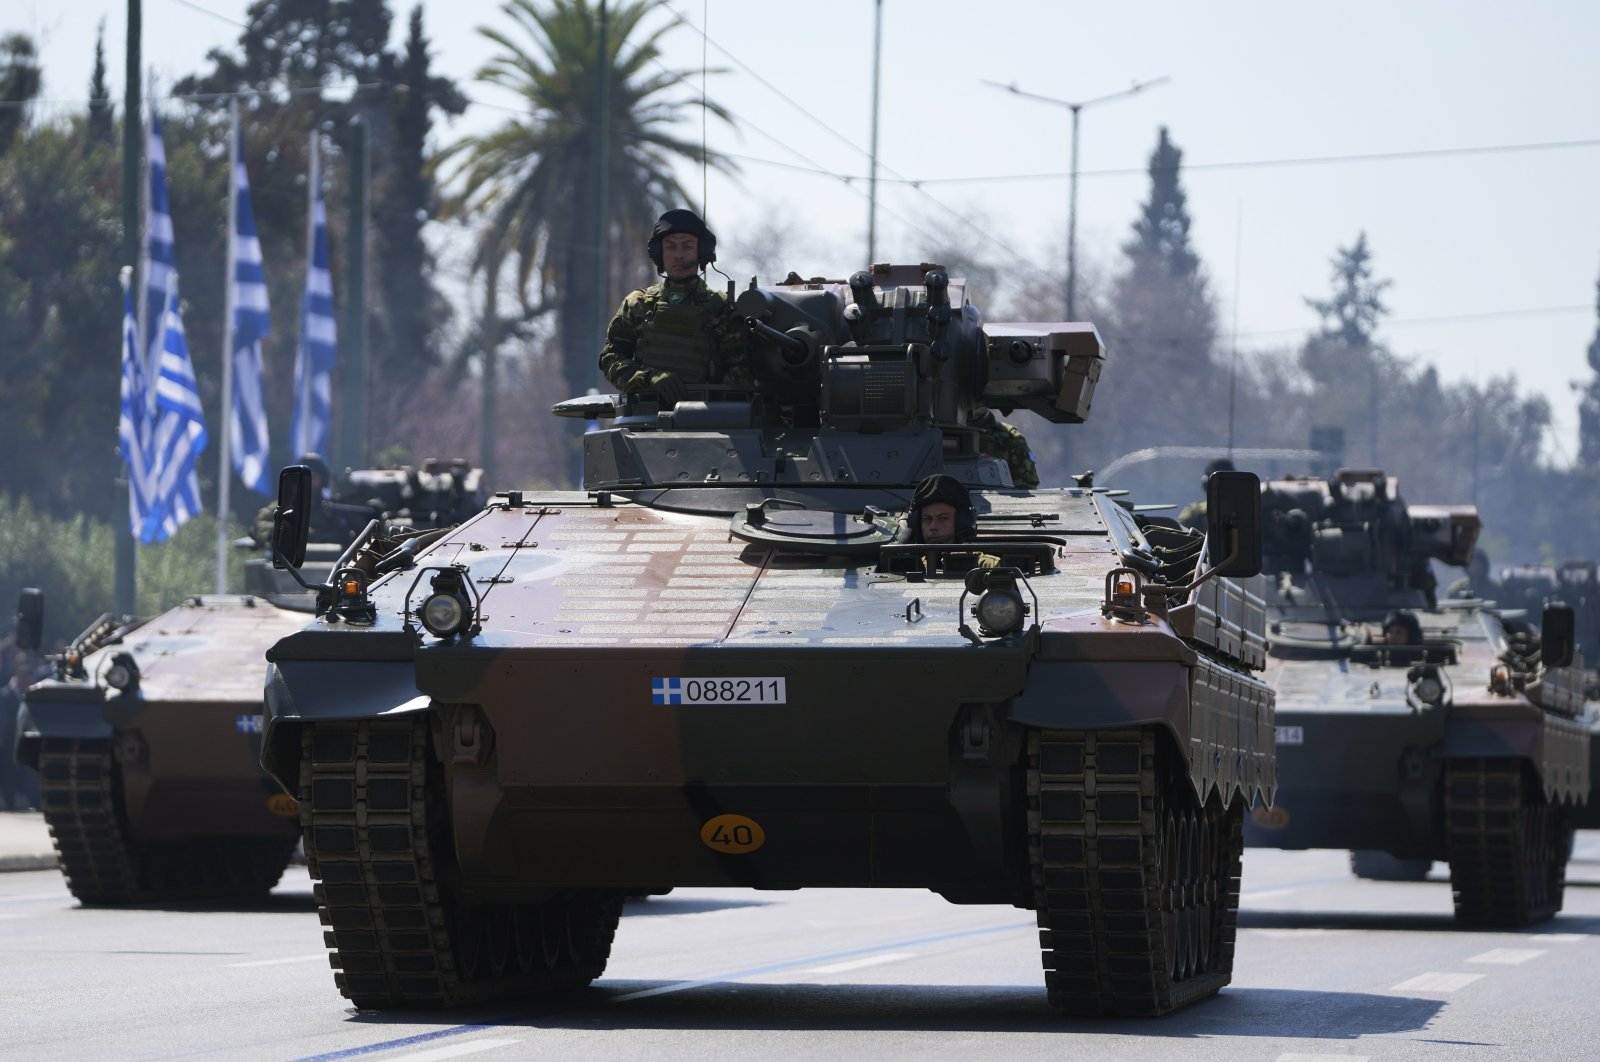 Army tanks take part in the military parade commemorating Greek Independence Day in Athens, Greece, March 25, 2023. (AP Photo)